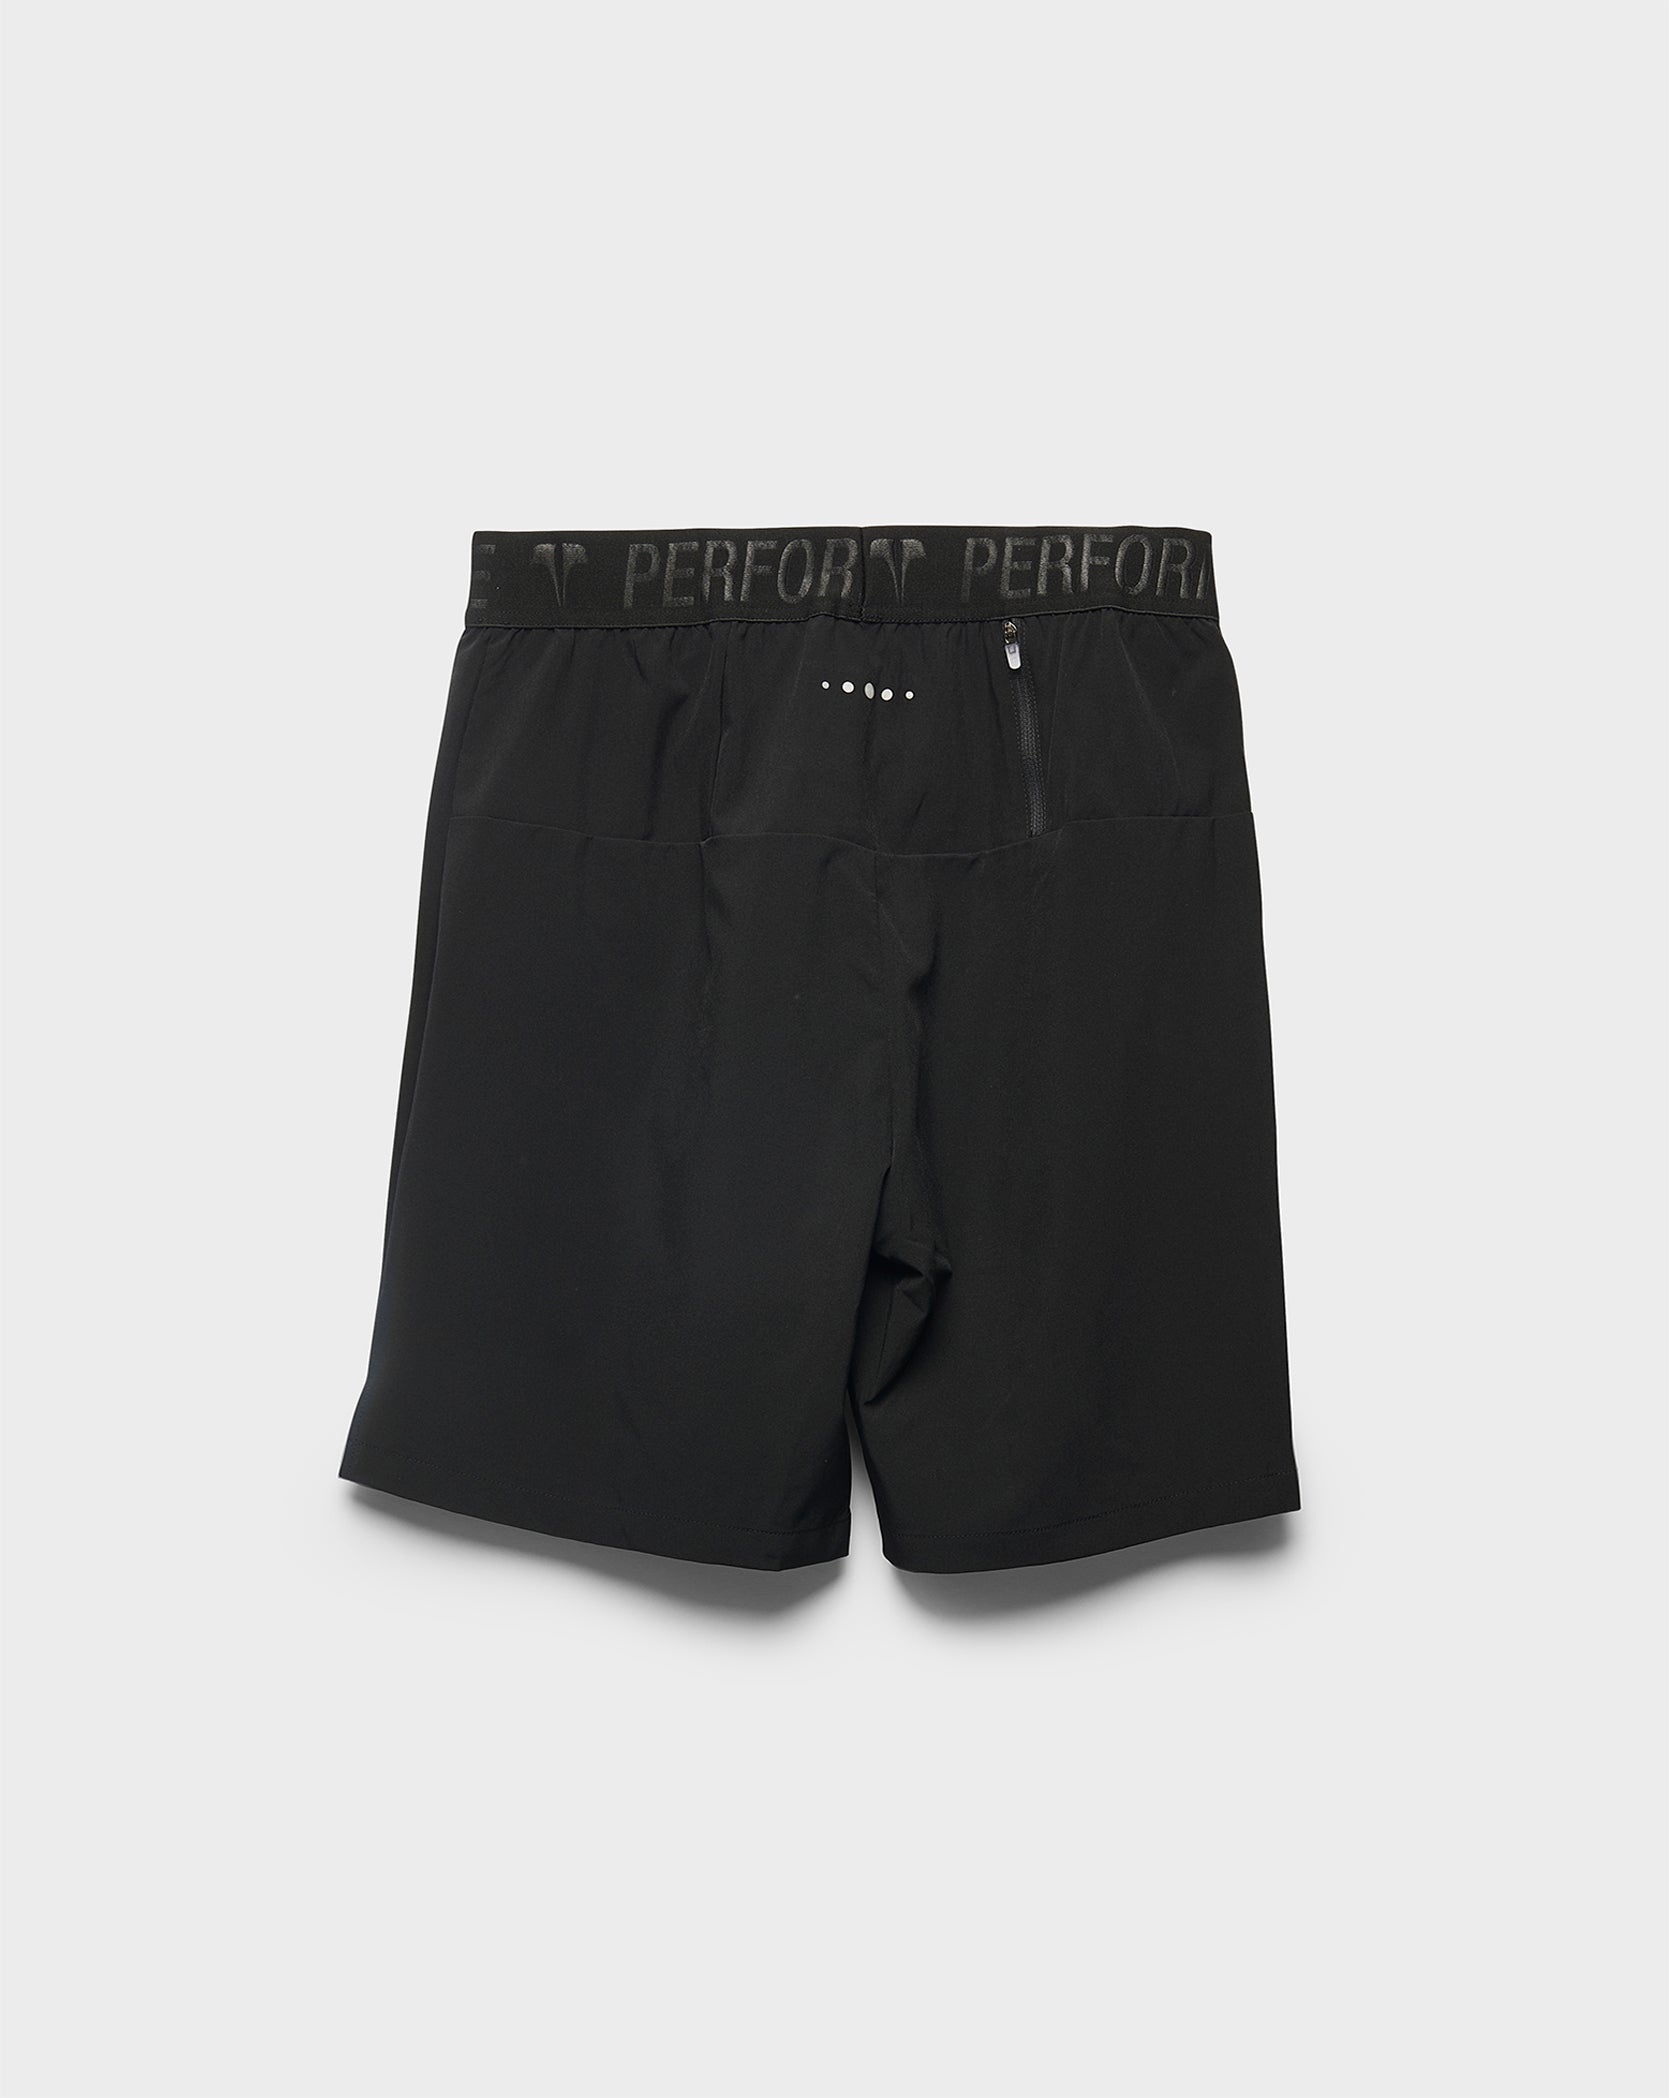 Twinzz active black shorts back